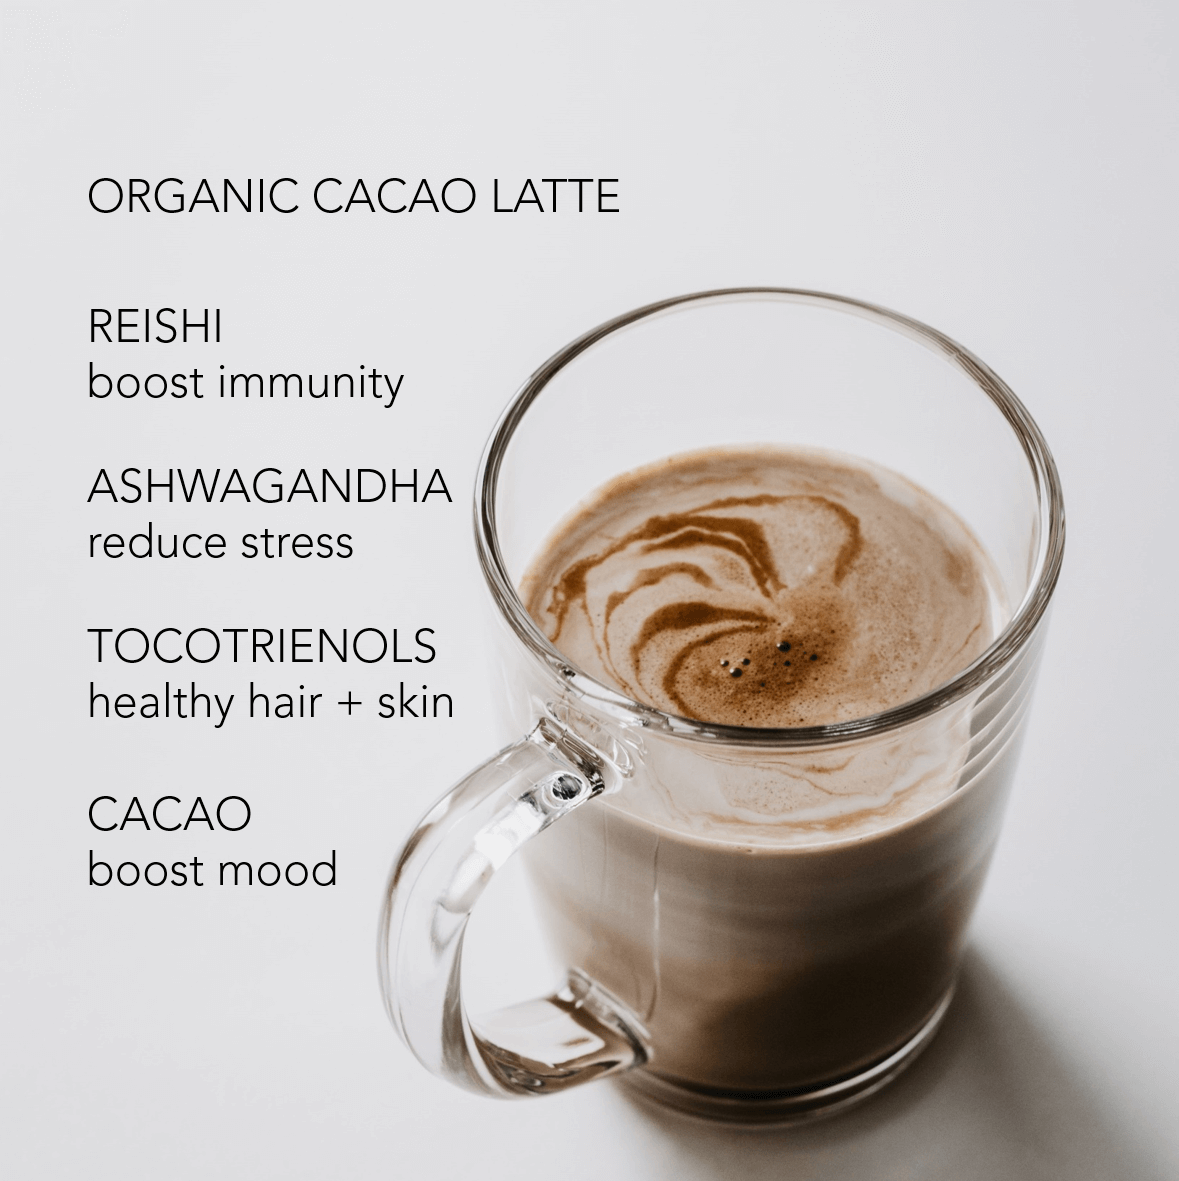 SAVOR THE WARMTH OF CACAO LATTE